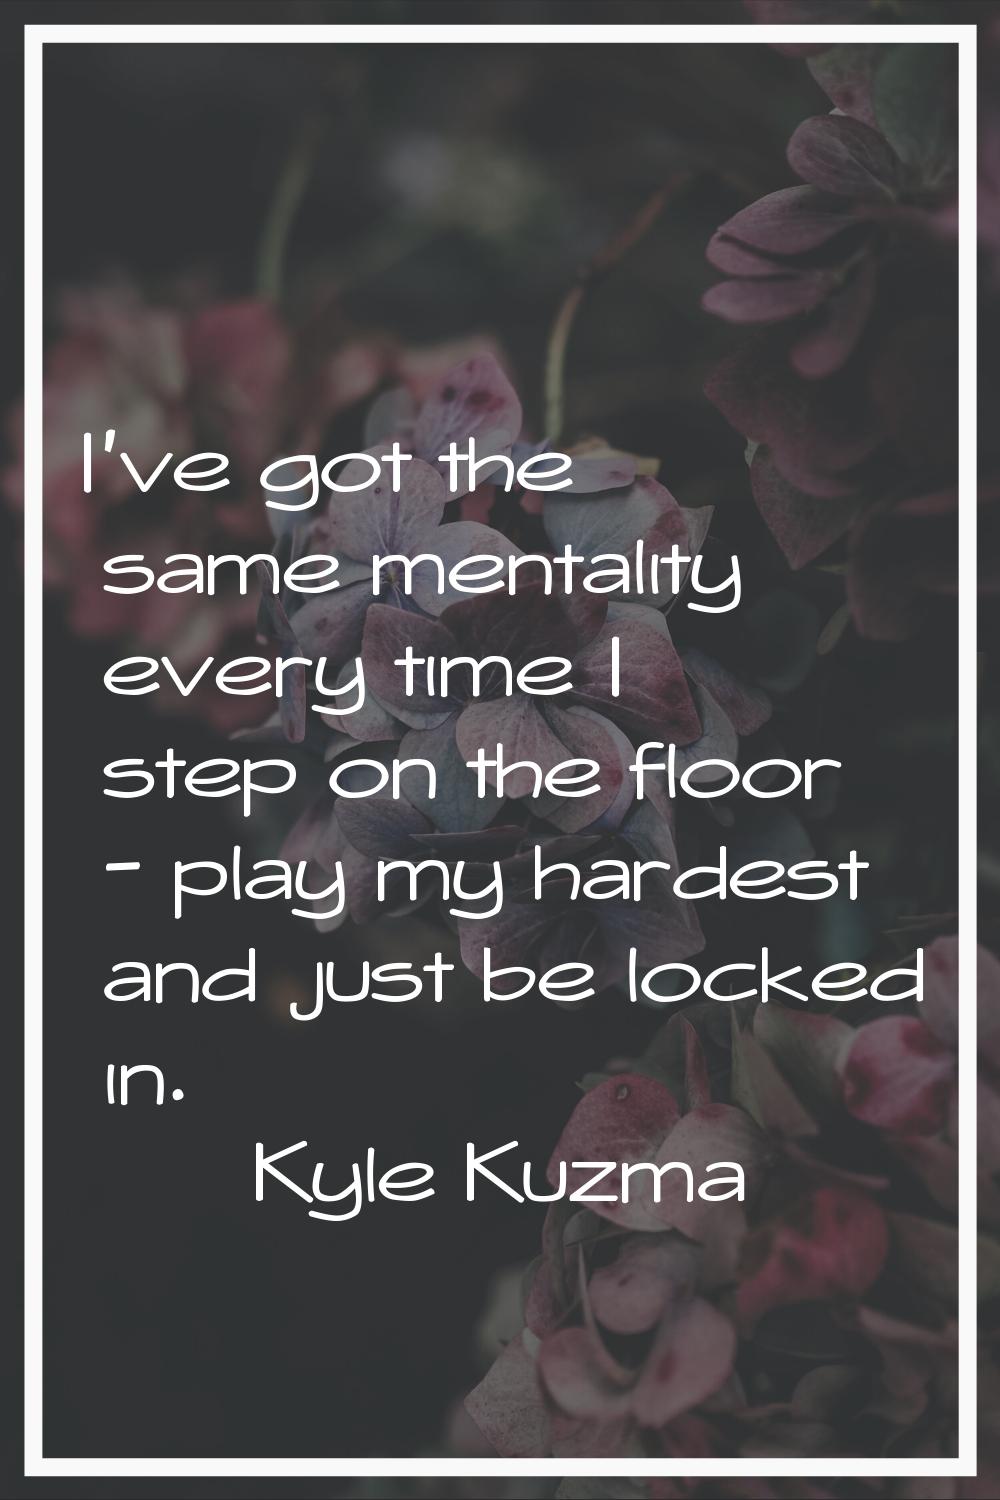 I've got the same mentality every time I step on the floor - play my hardest and just be locked in.